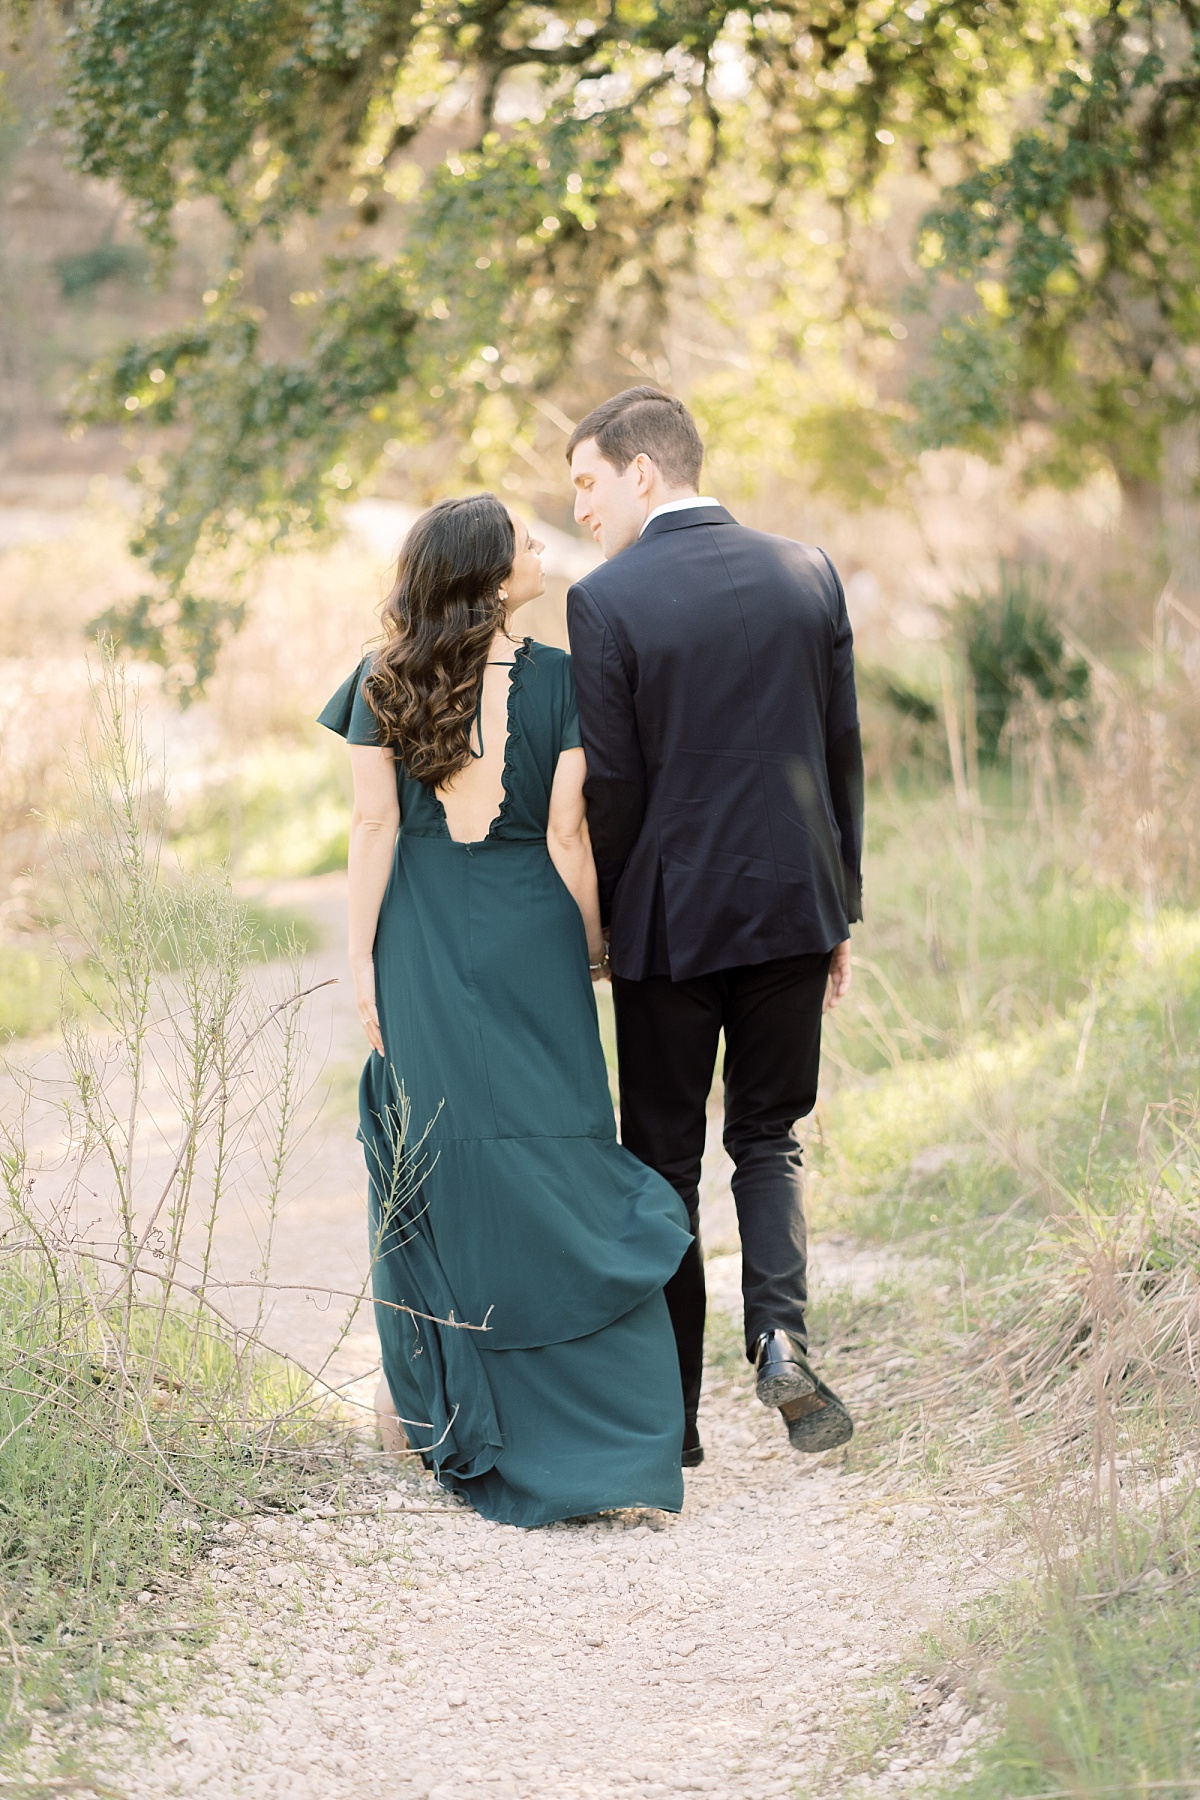 An attractive couple looks lovingly at each other while holding hands and walking away from the camera in a beautiful park.